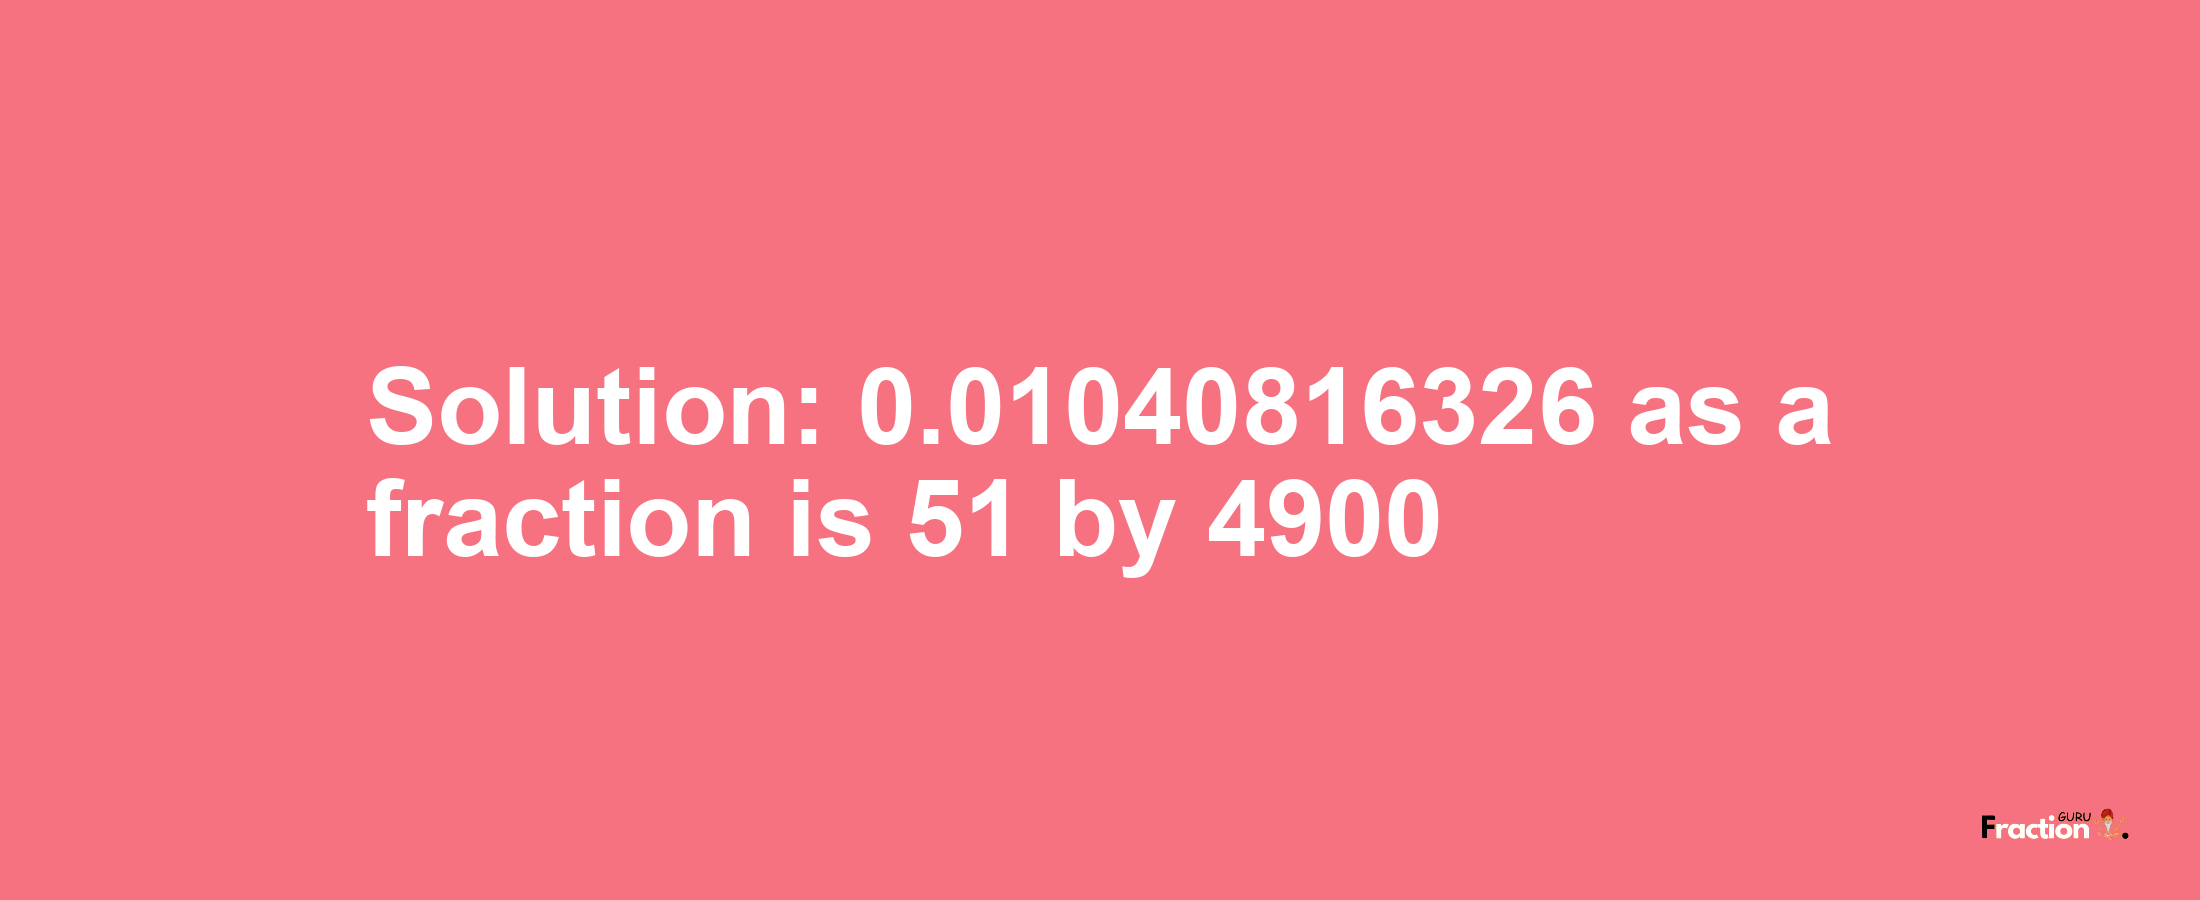 Solution:0.01040816326 as a fraction is 51/4900